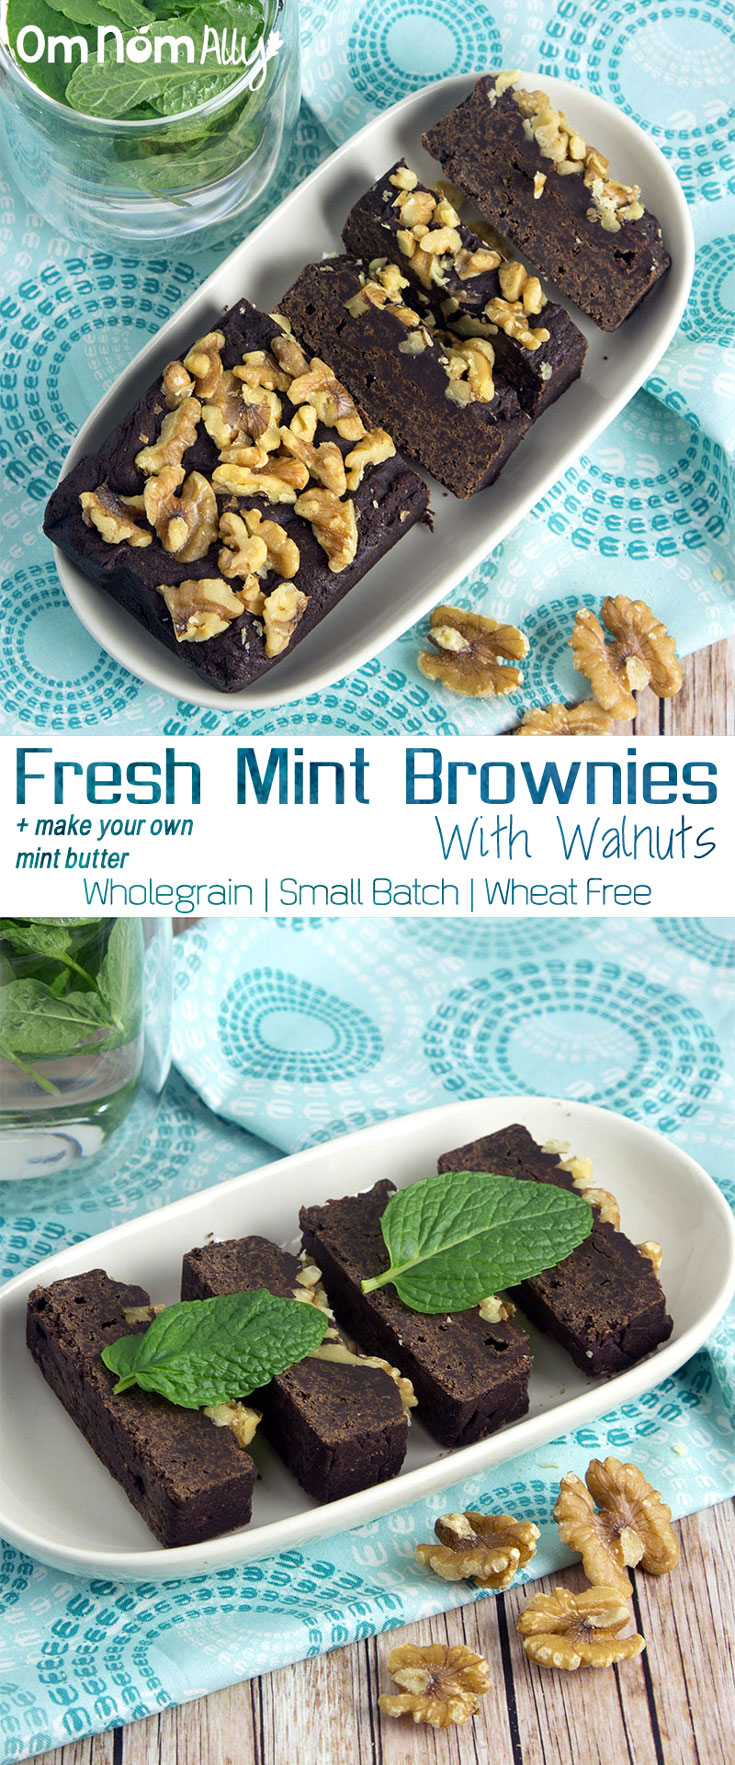 Fresh Mint Cacao Brownies with Walnuts @OmNomAlly 